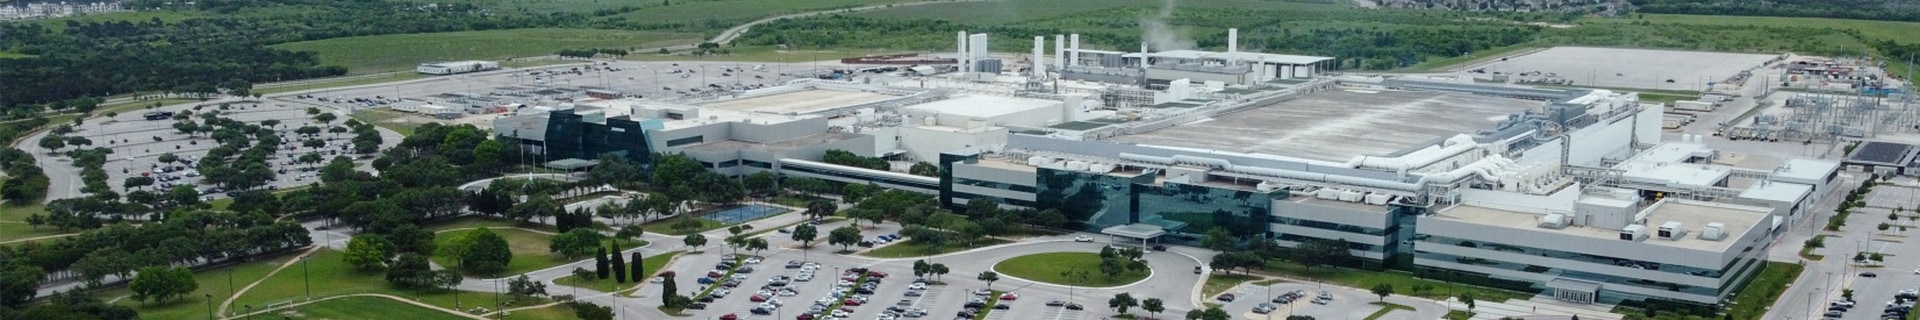 an aerial view of Samsung semiconductor manufacturing facility